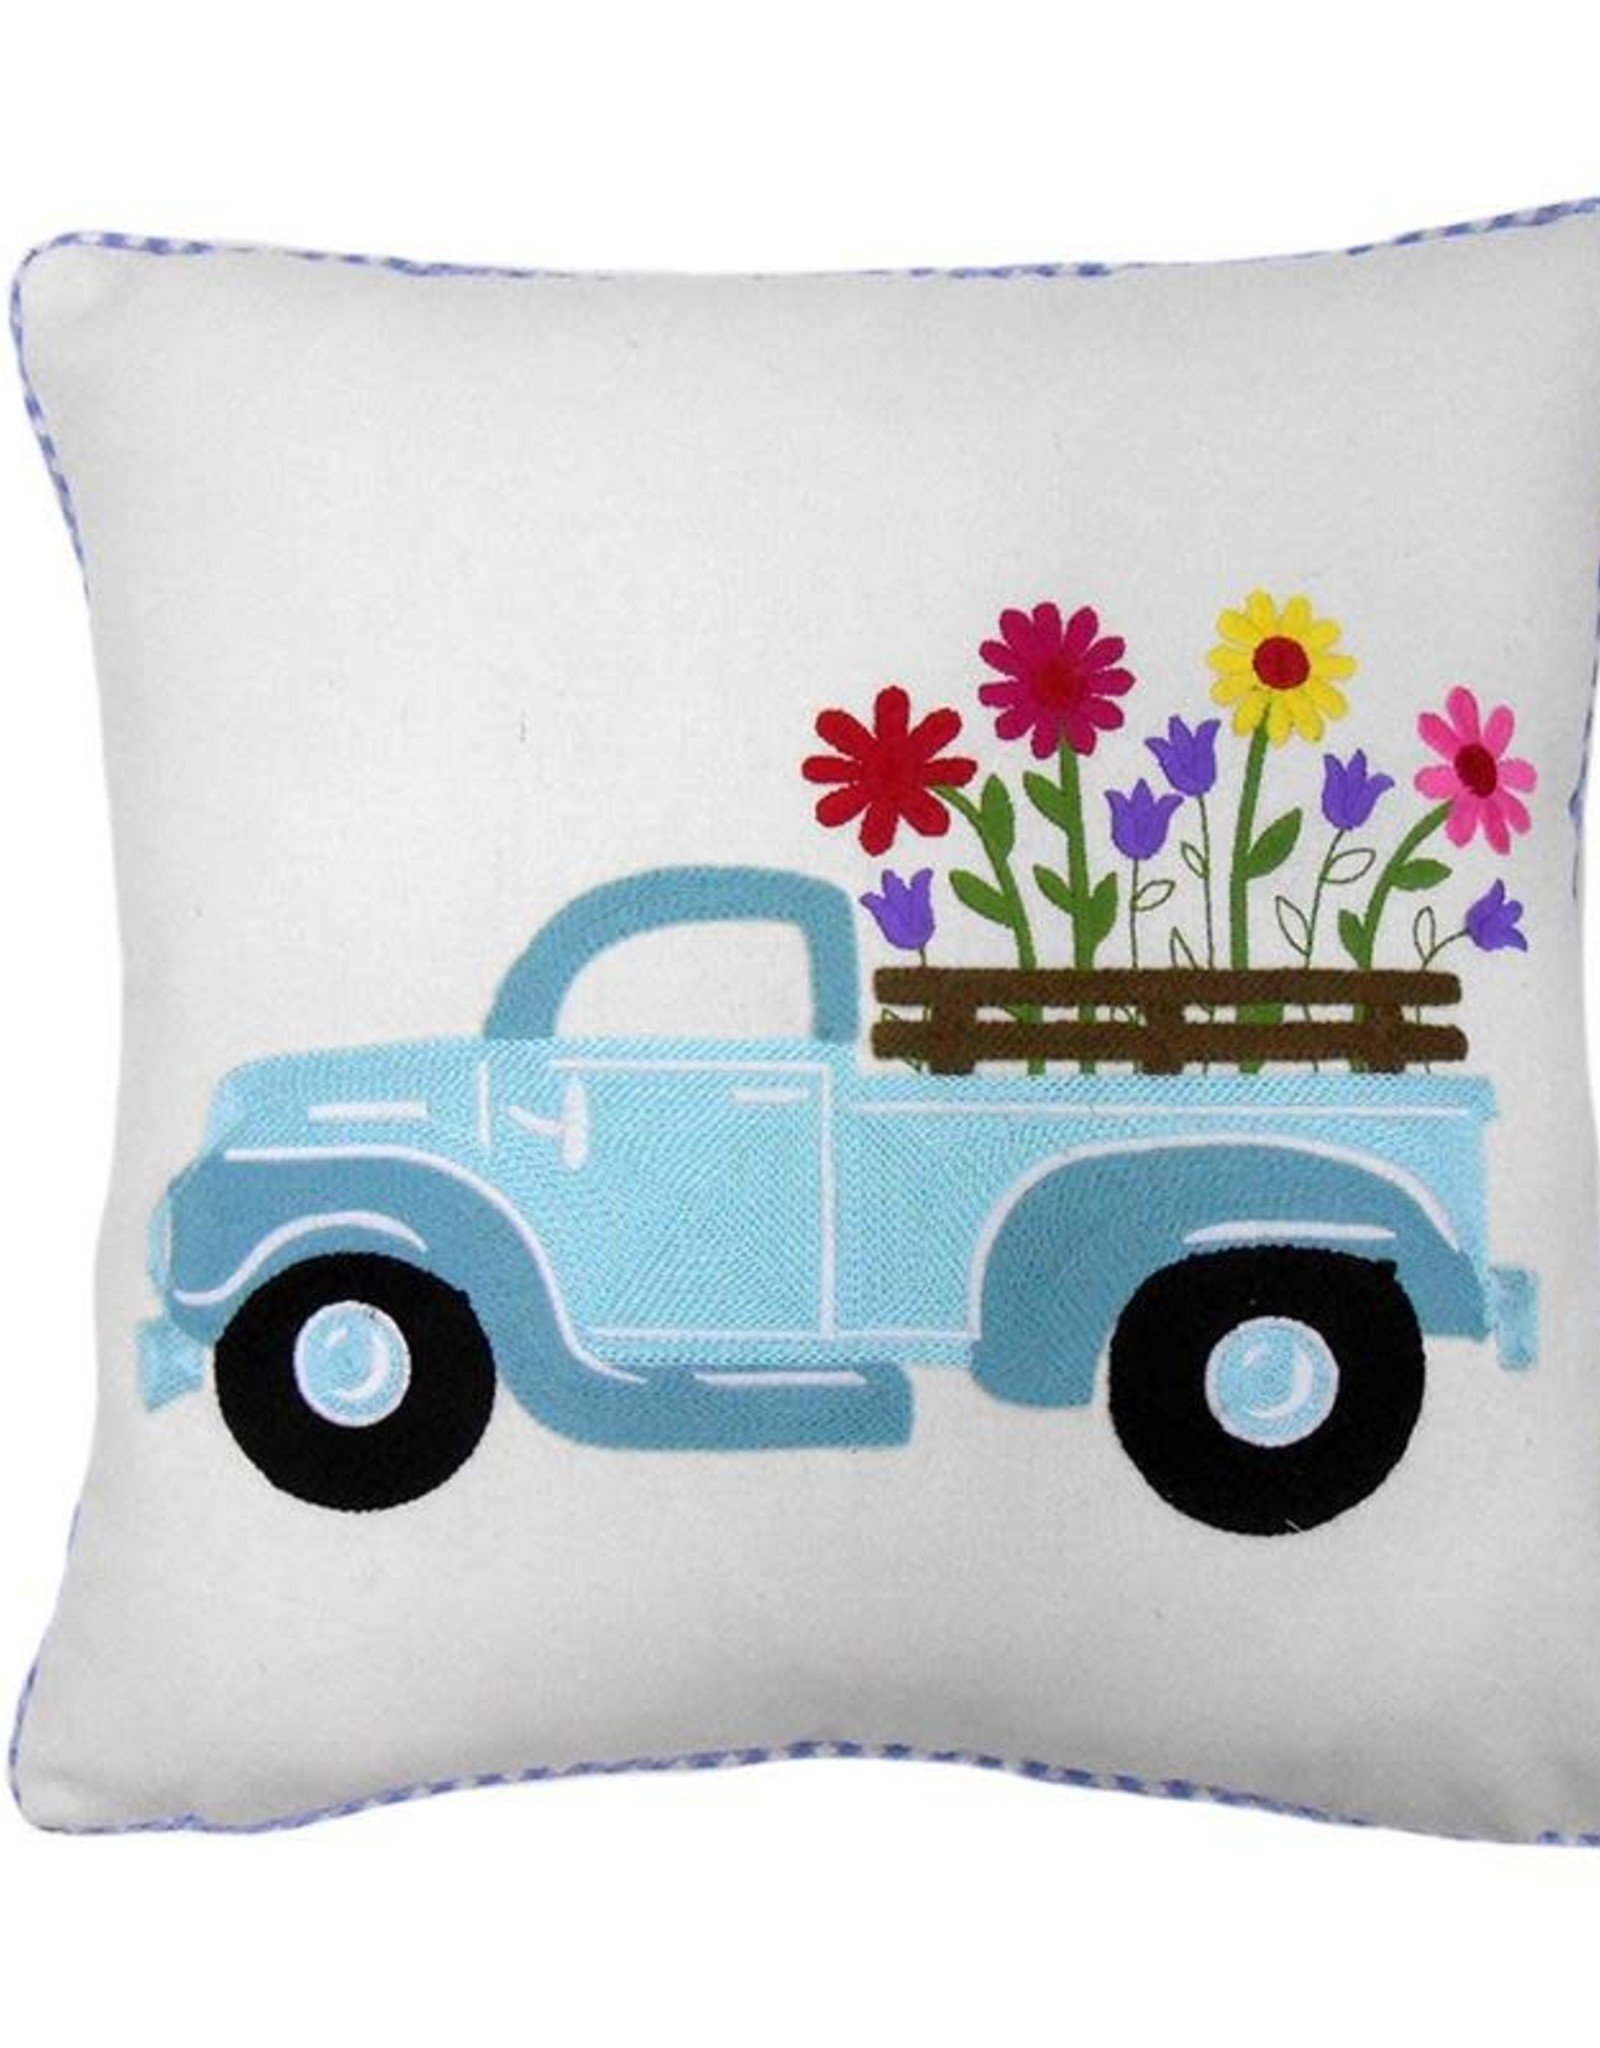 Embroidered Flower Truck Pillow